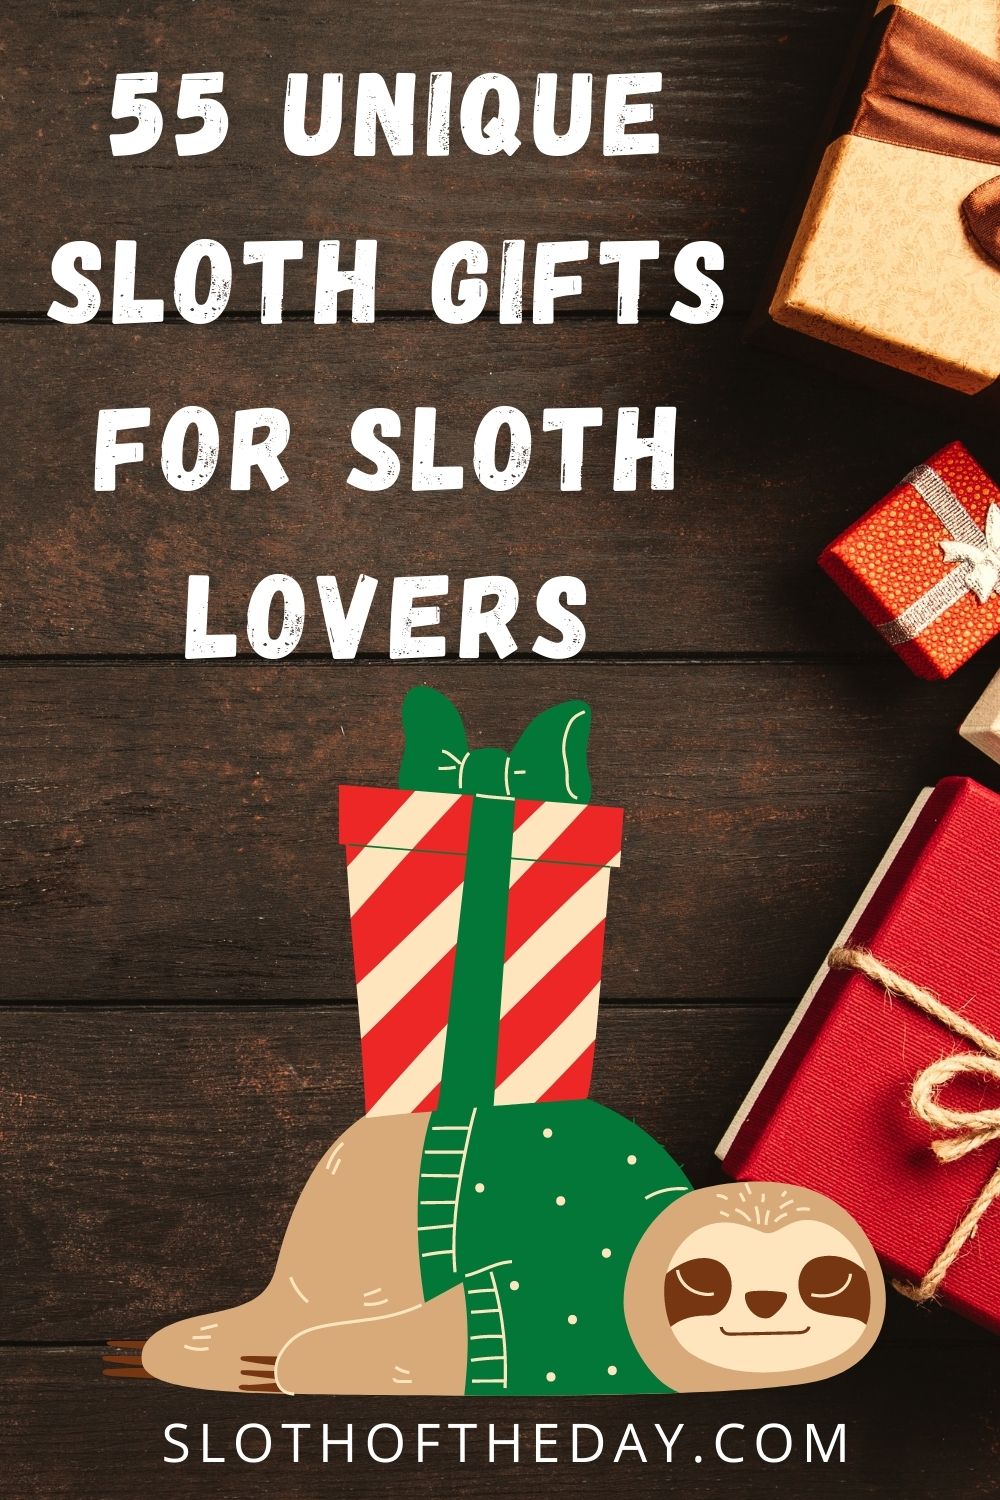 55 Unique Sloth Gifts For Sloth Lovers Pinterest Pin